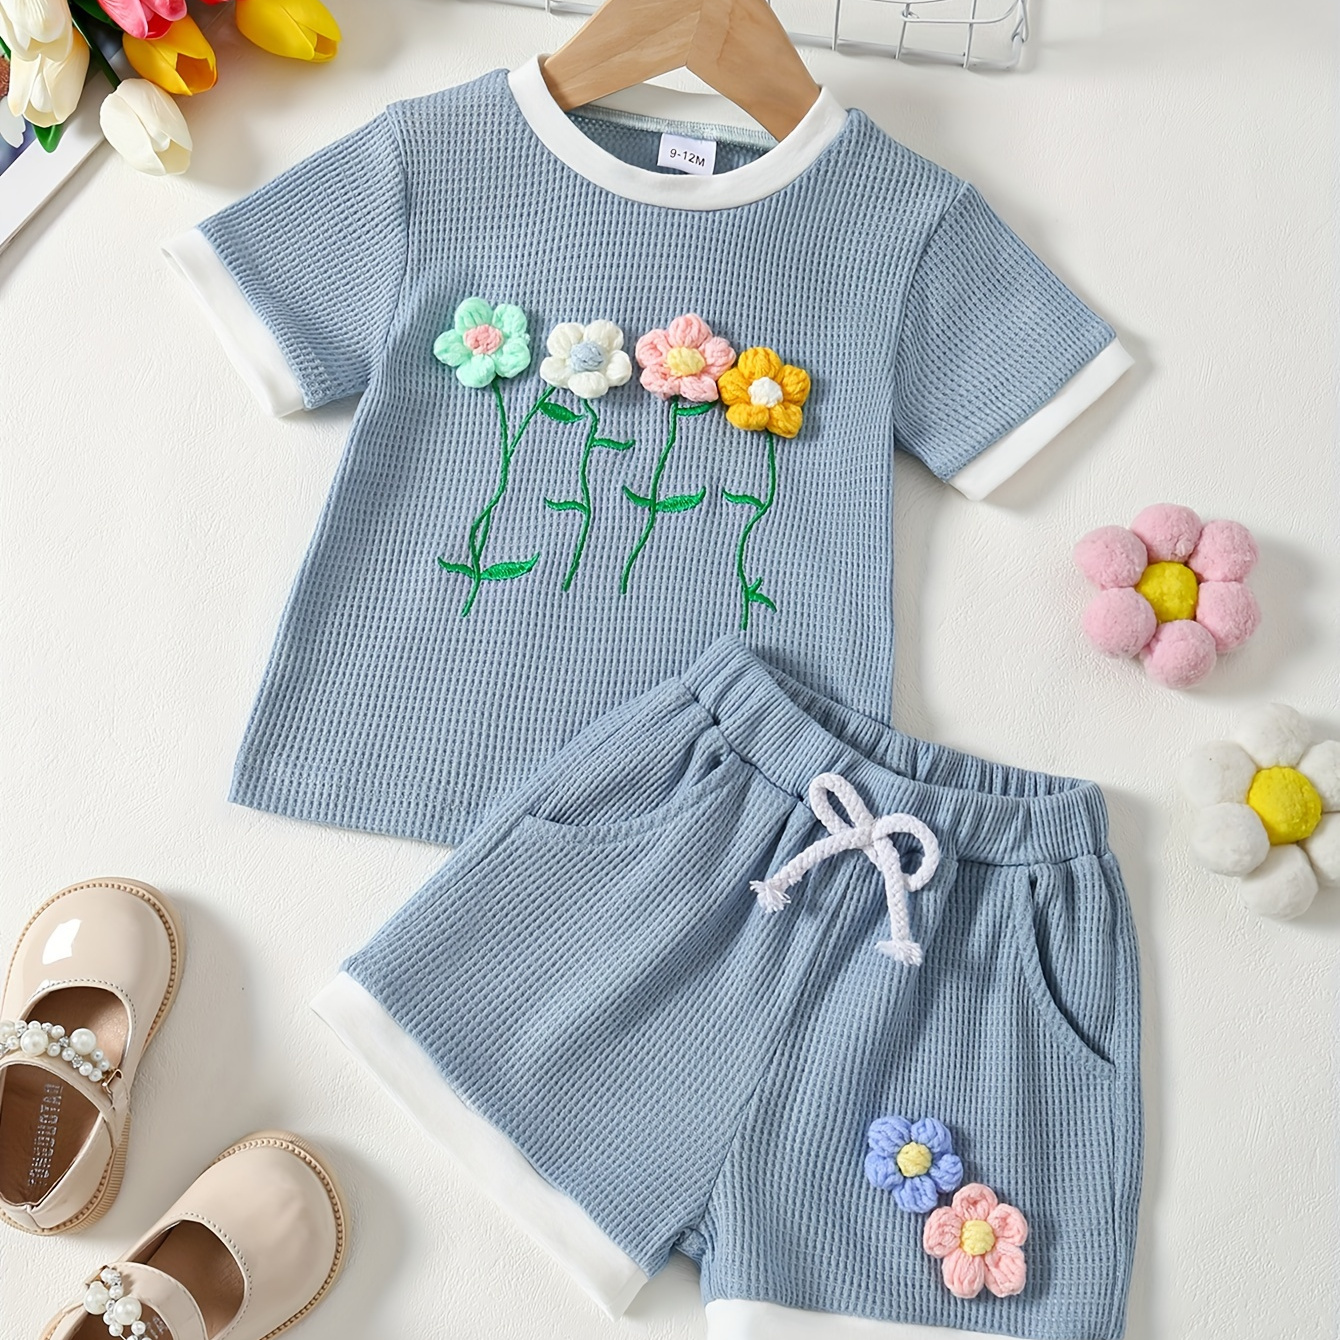 

Baby's Cute Flower Applique 2pcs Casual Summer Outfit, Waffle Textured T-shirt & Shorts Set, Toddler & Infant Girl's Clothes For Daily/holiday, As Gift